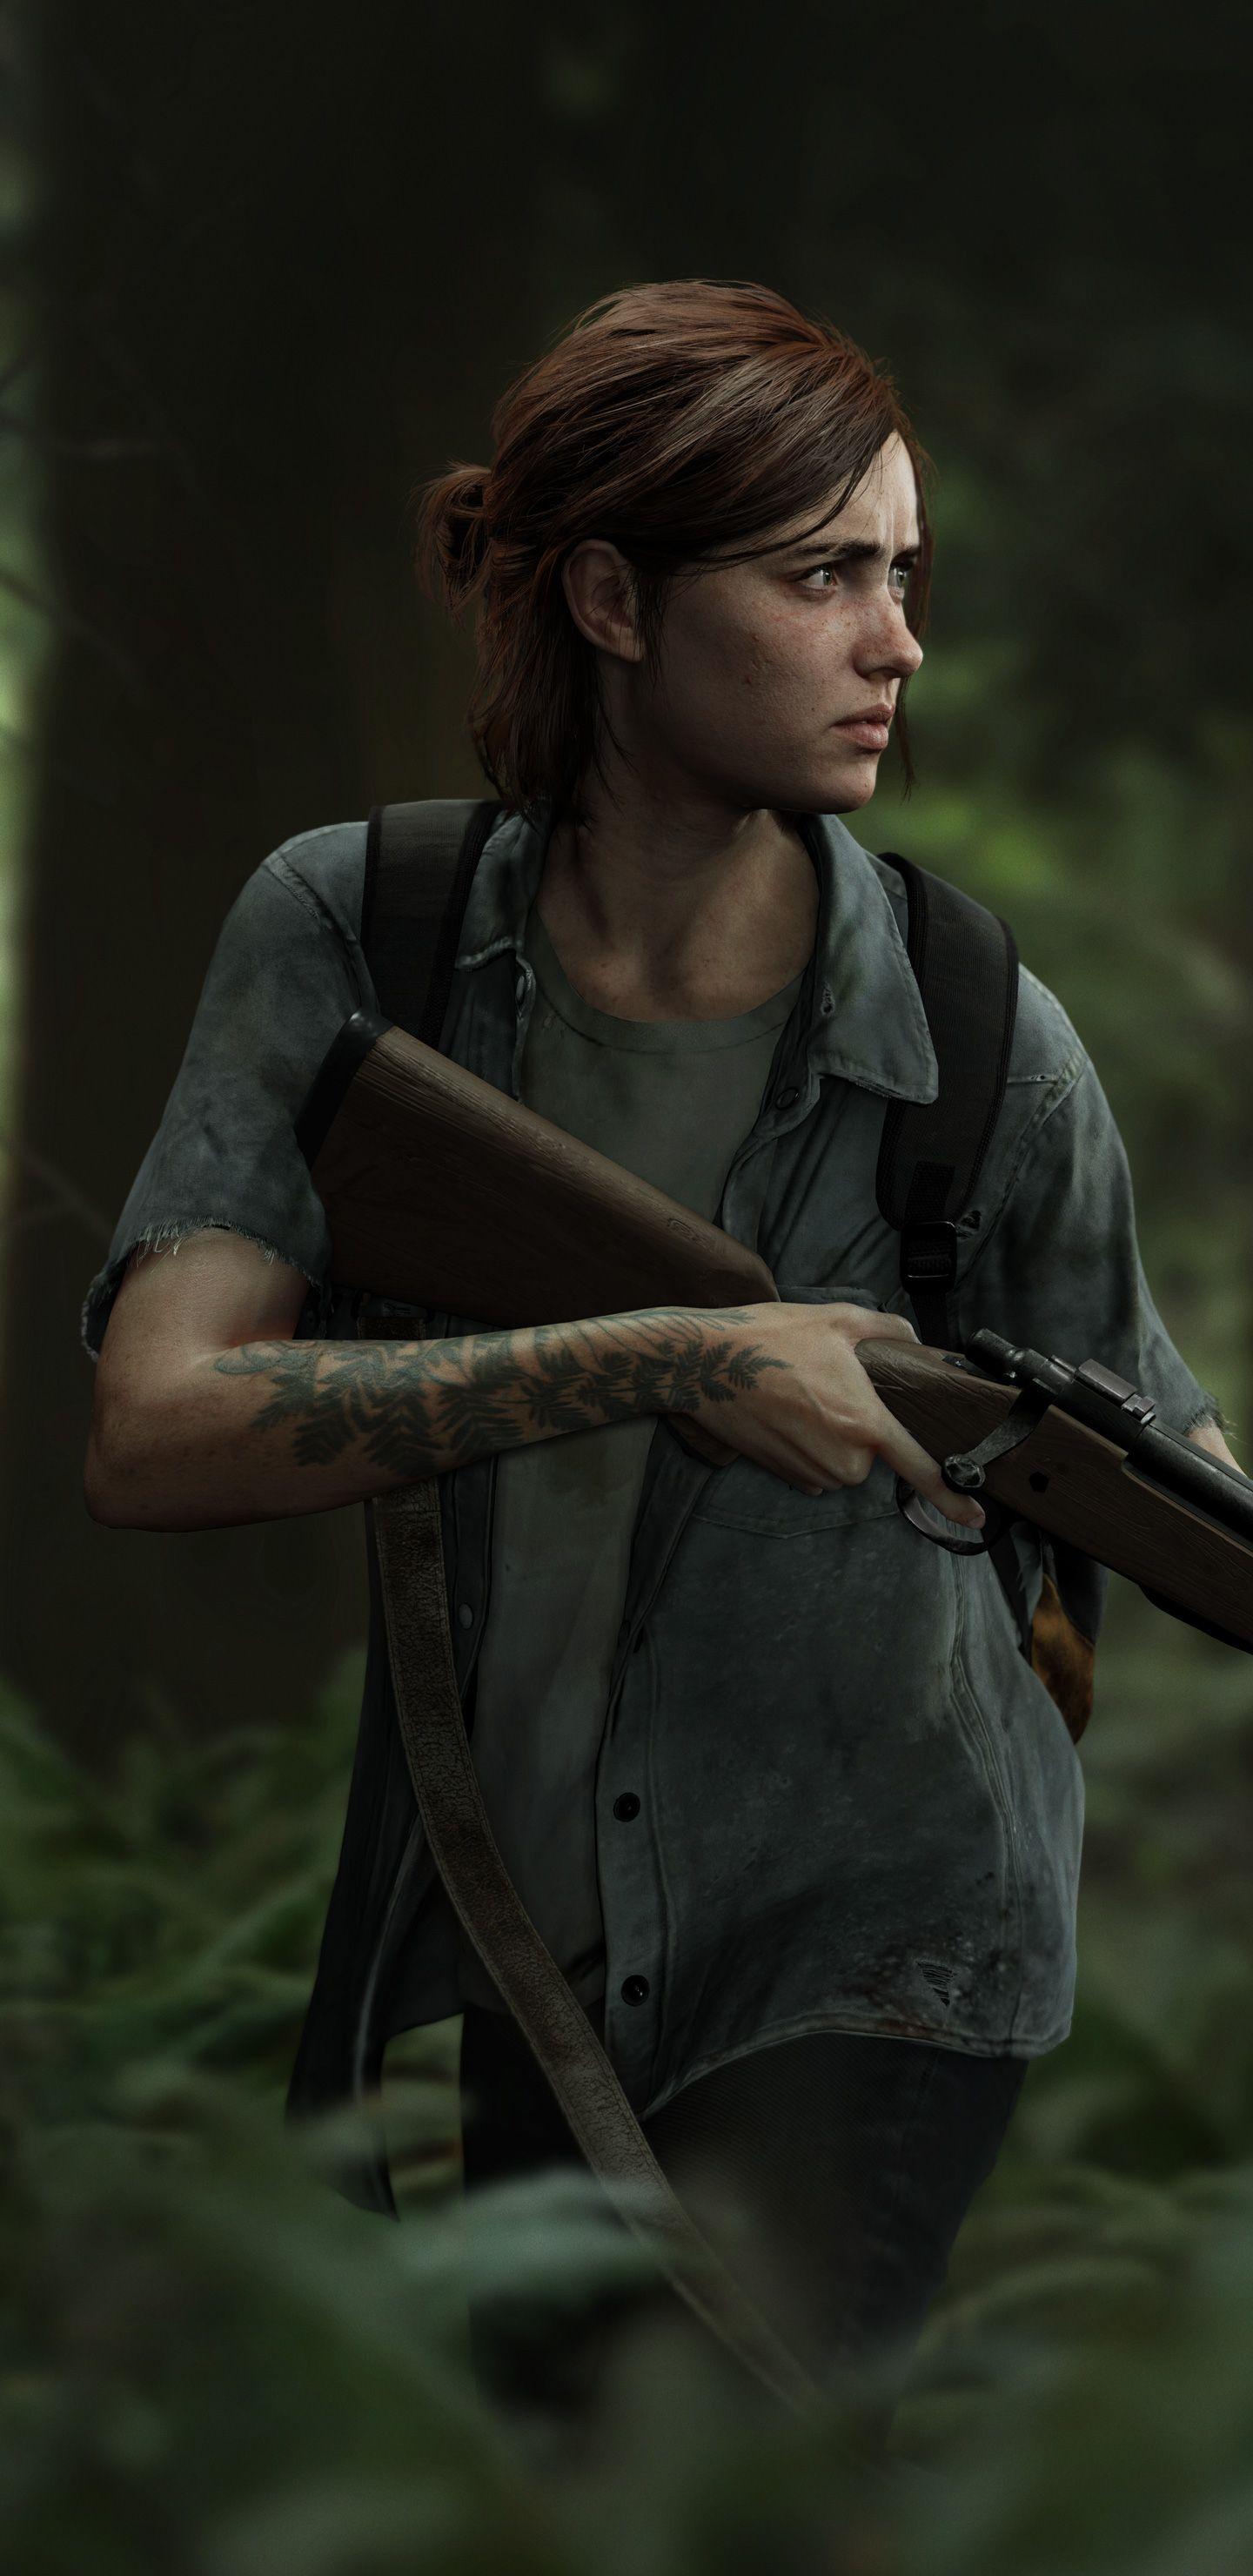 1440 x 2960 · jpeg - The Last Of Us 2 4k Mobile Wallpapers - Wallpaper Cave